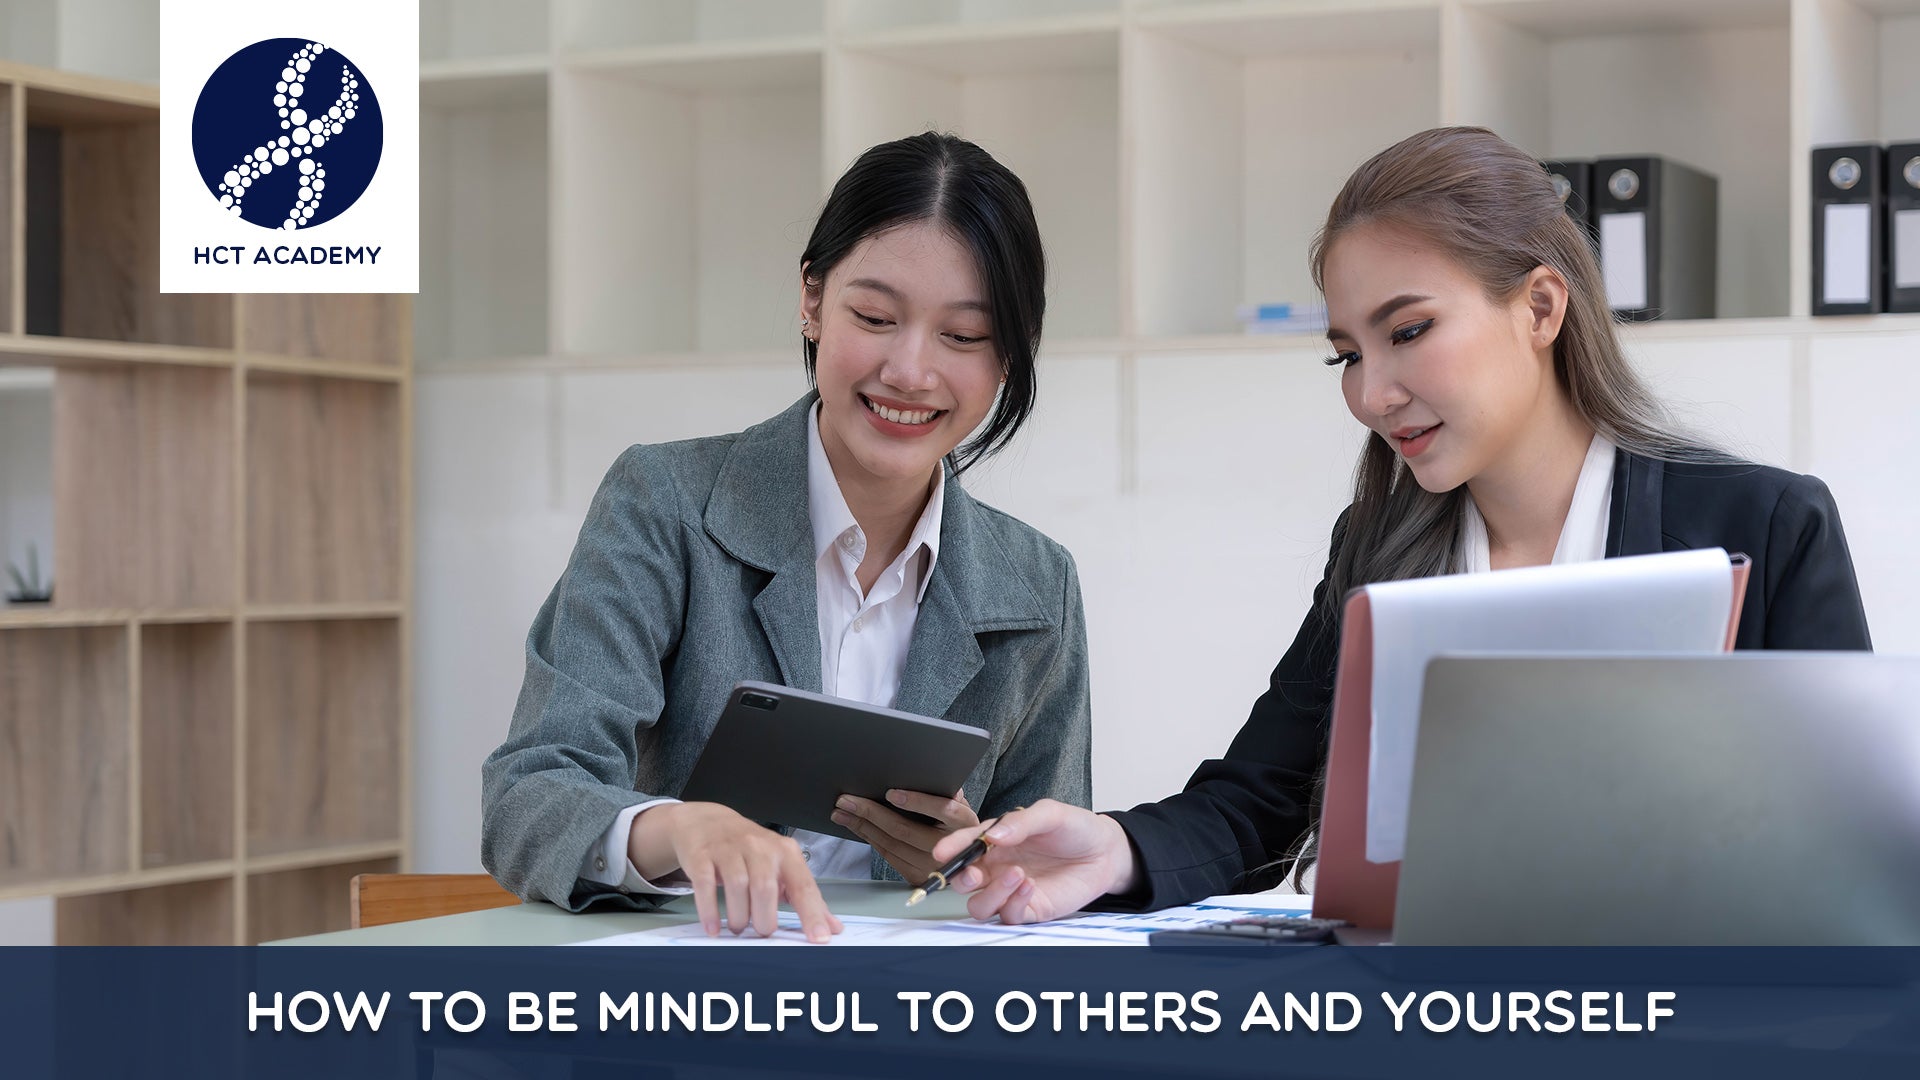 How to be mindful to others and yourself